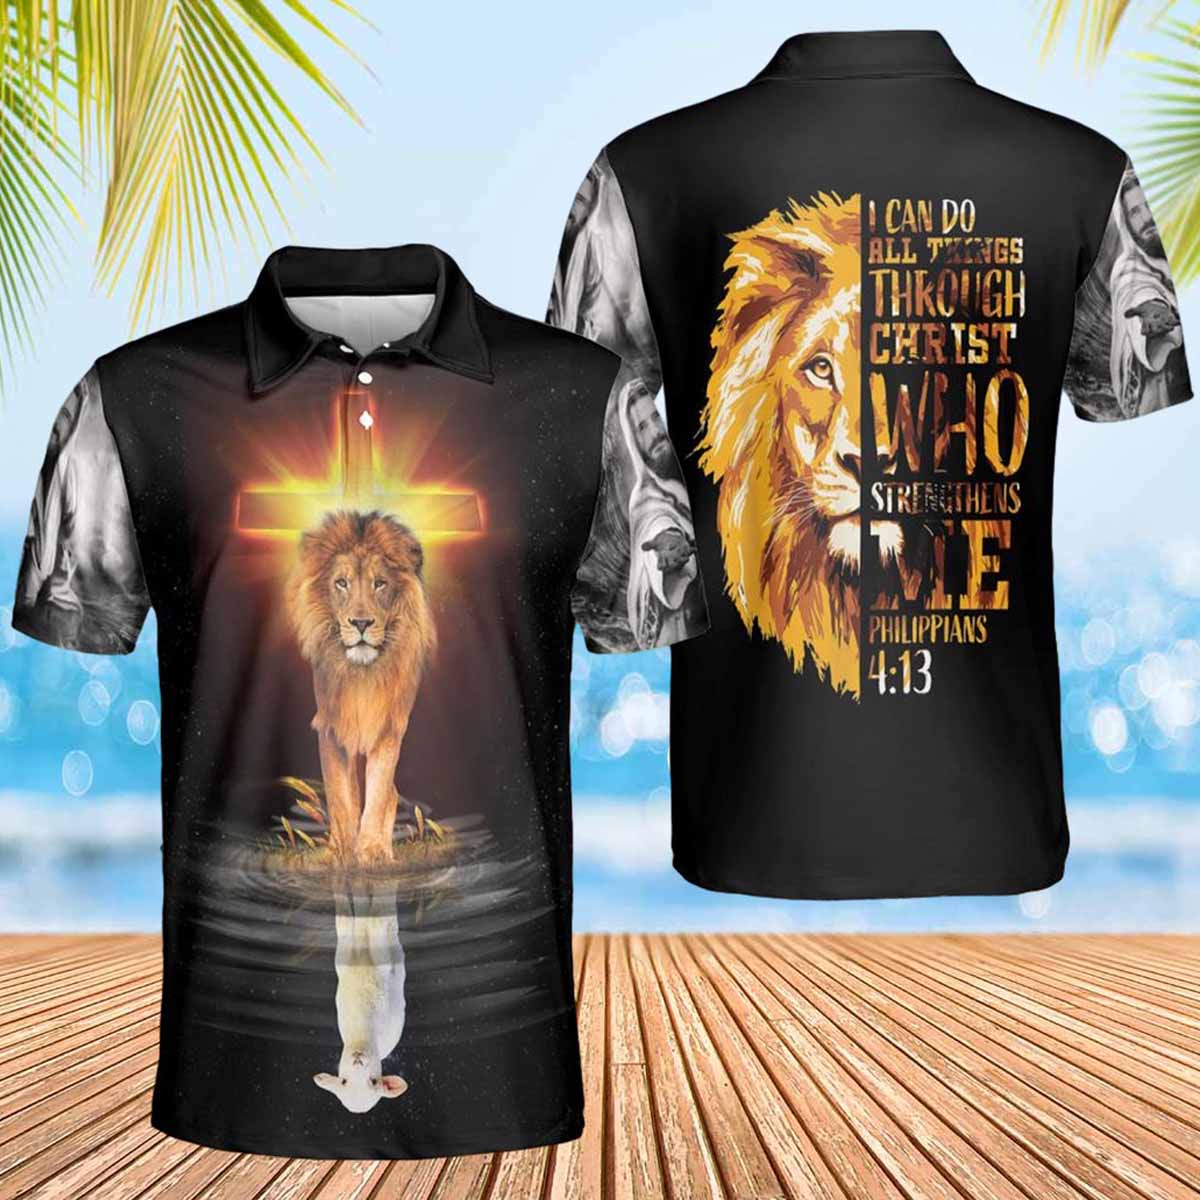 I Can Do All Things Lion Jesus Polo Shirts - Christian Shirt For Men And Women